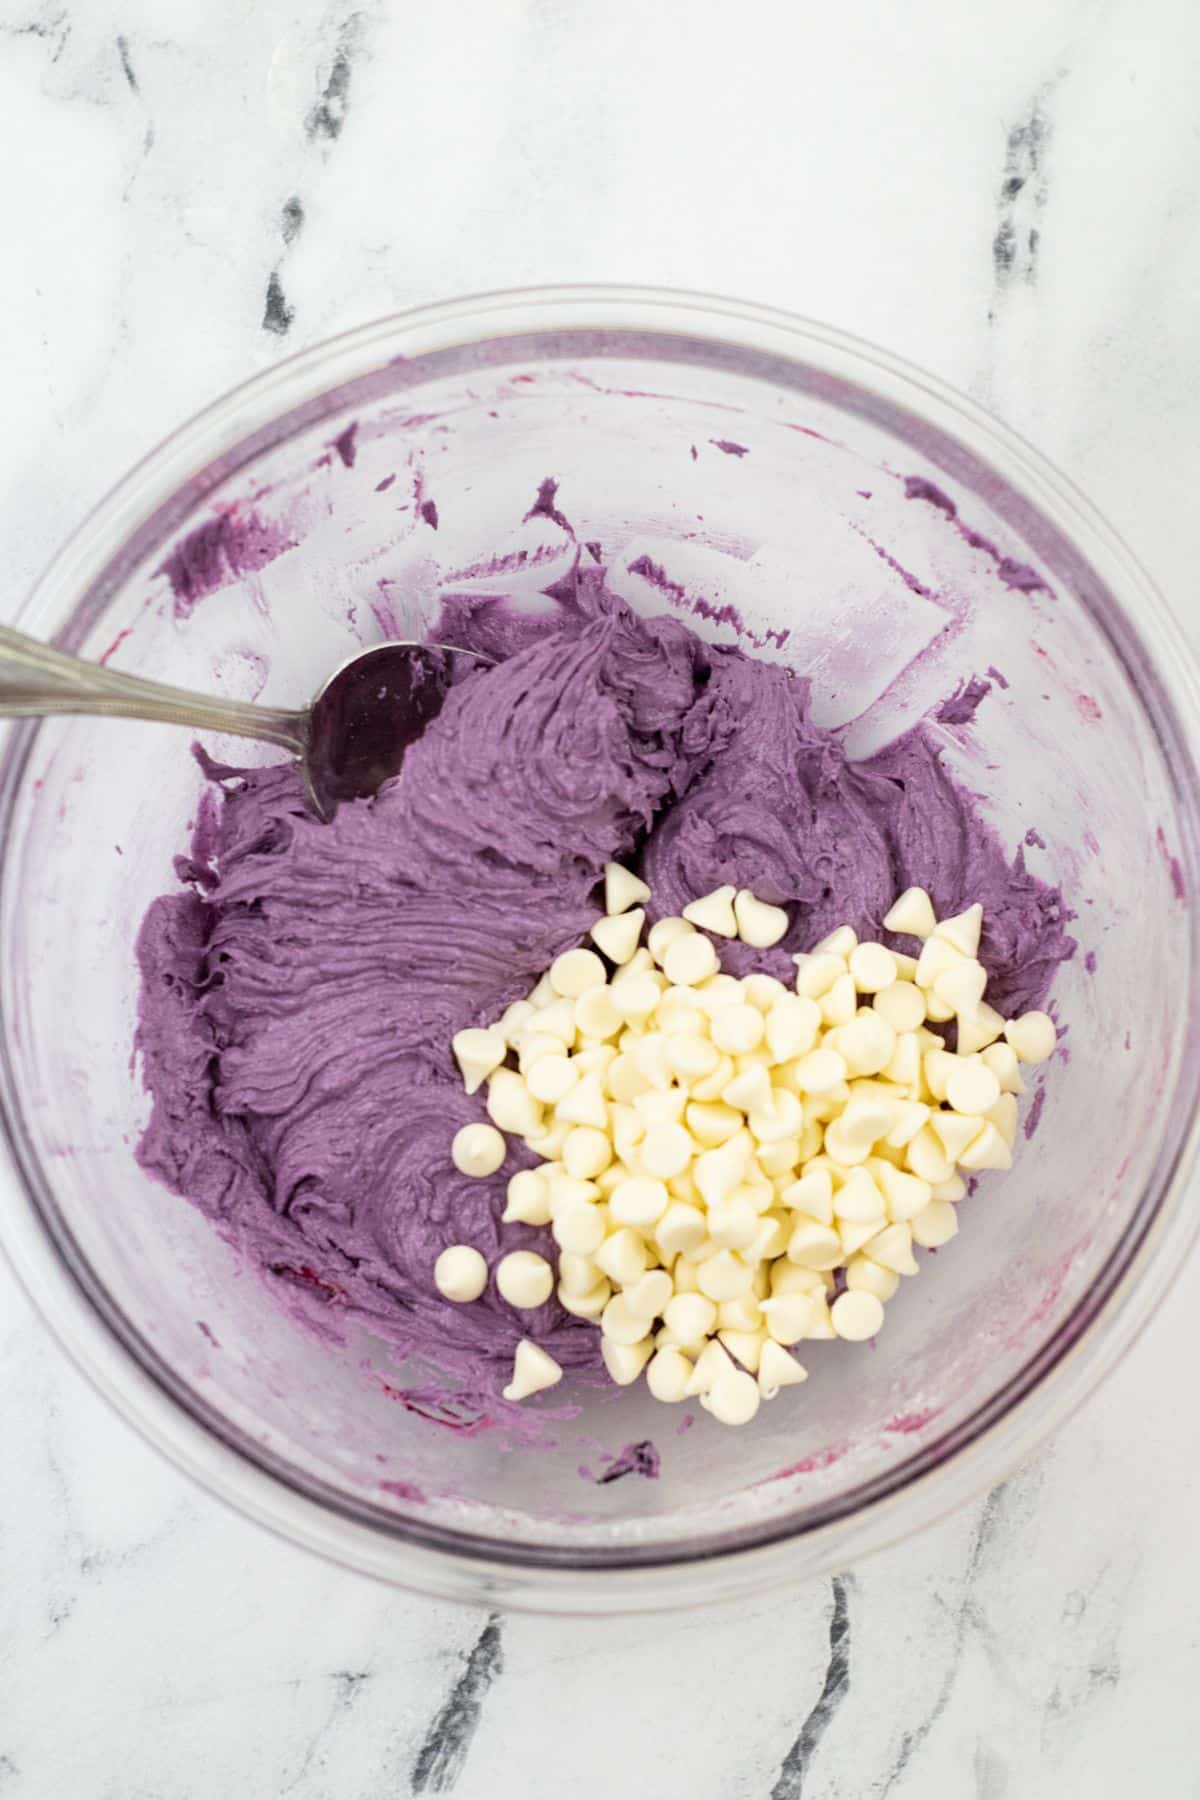 white chocolate chips being folded into the blueberry mixture in a glass bowl with a spoon